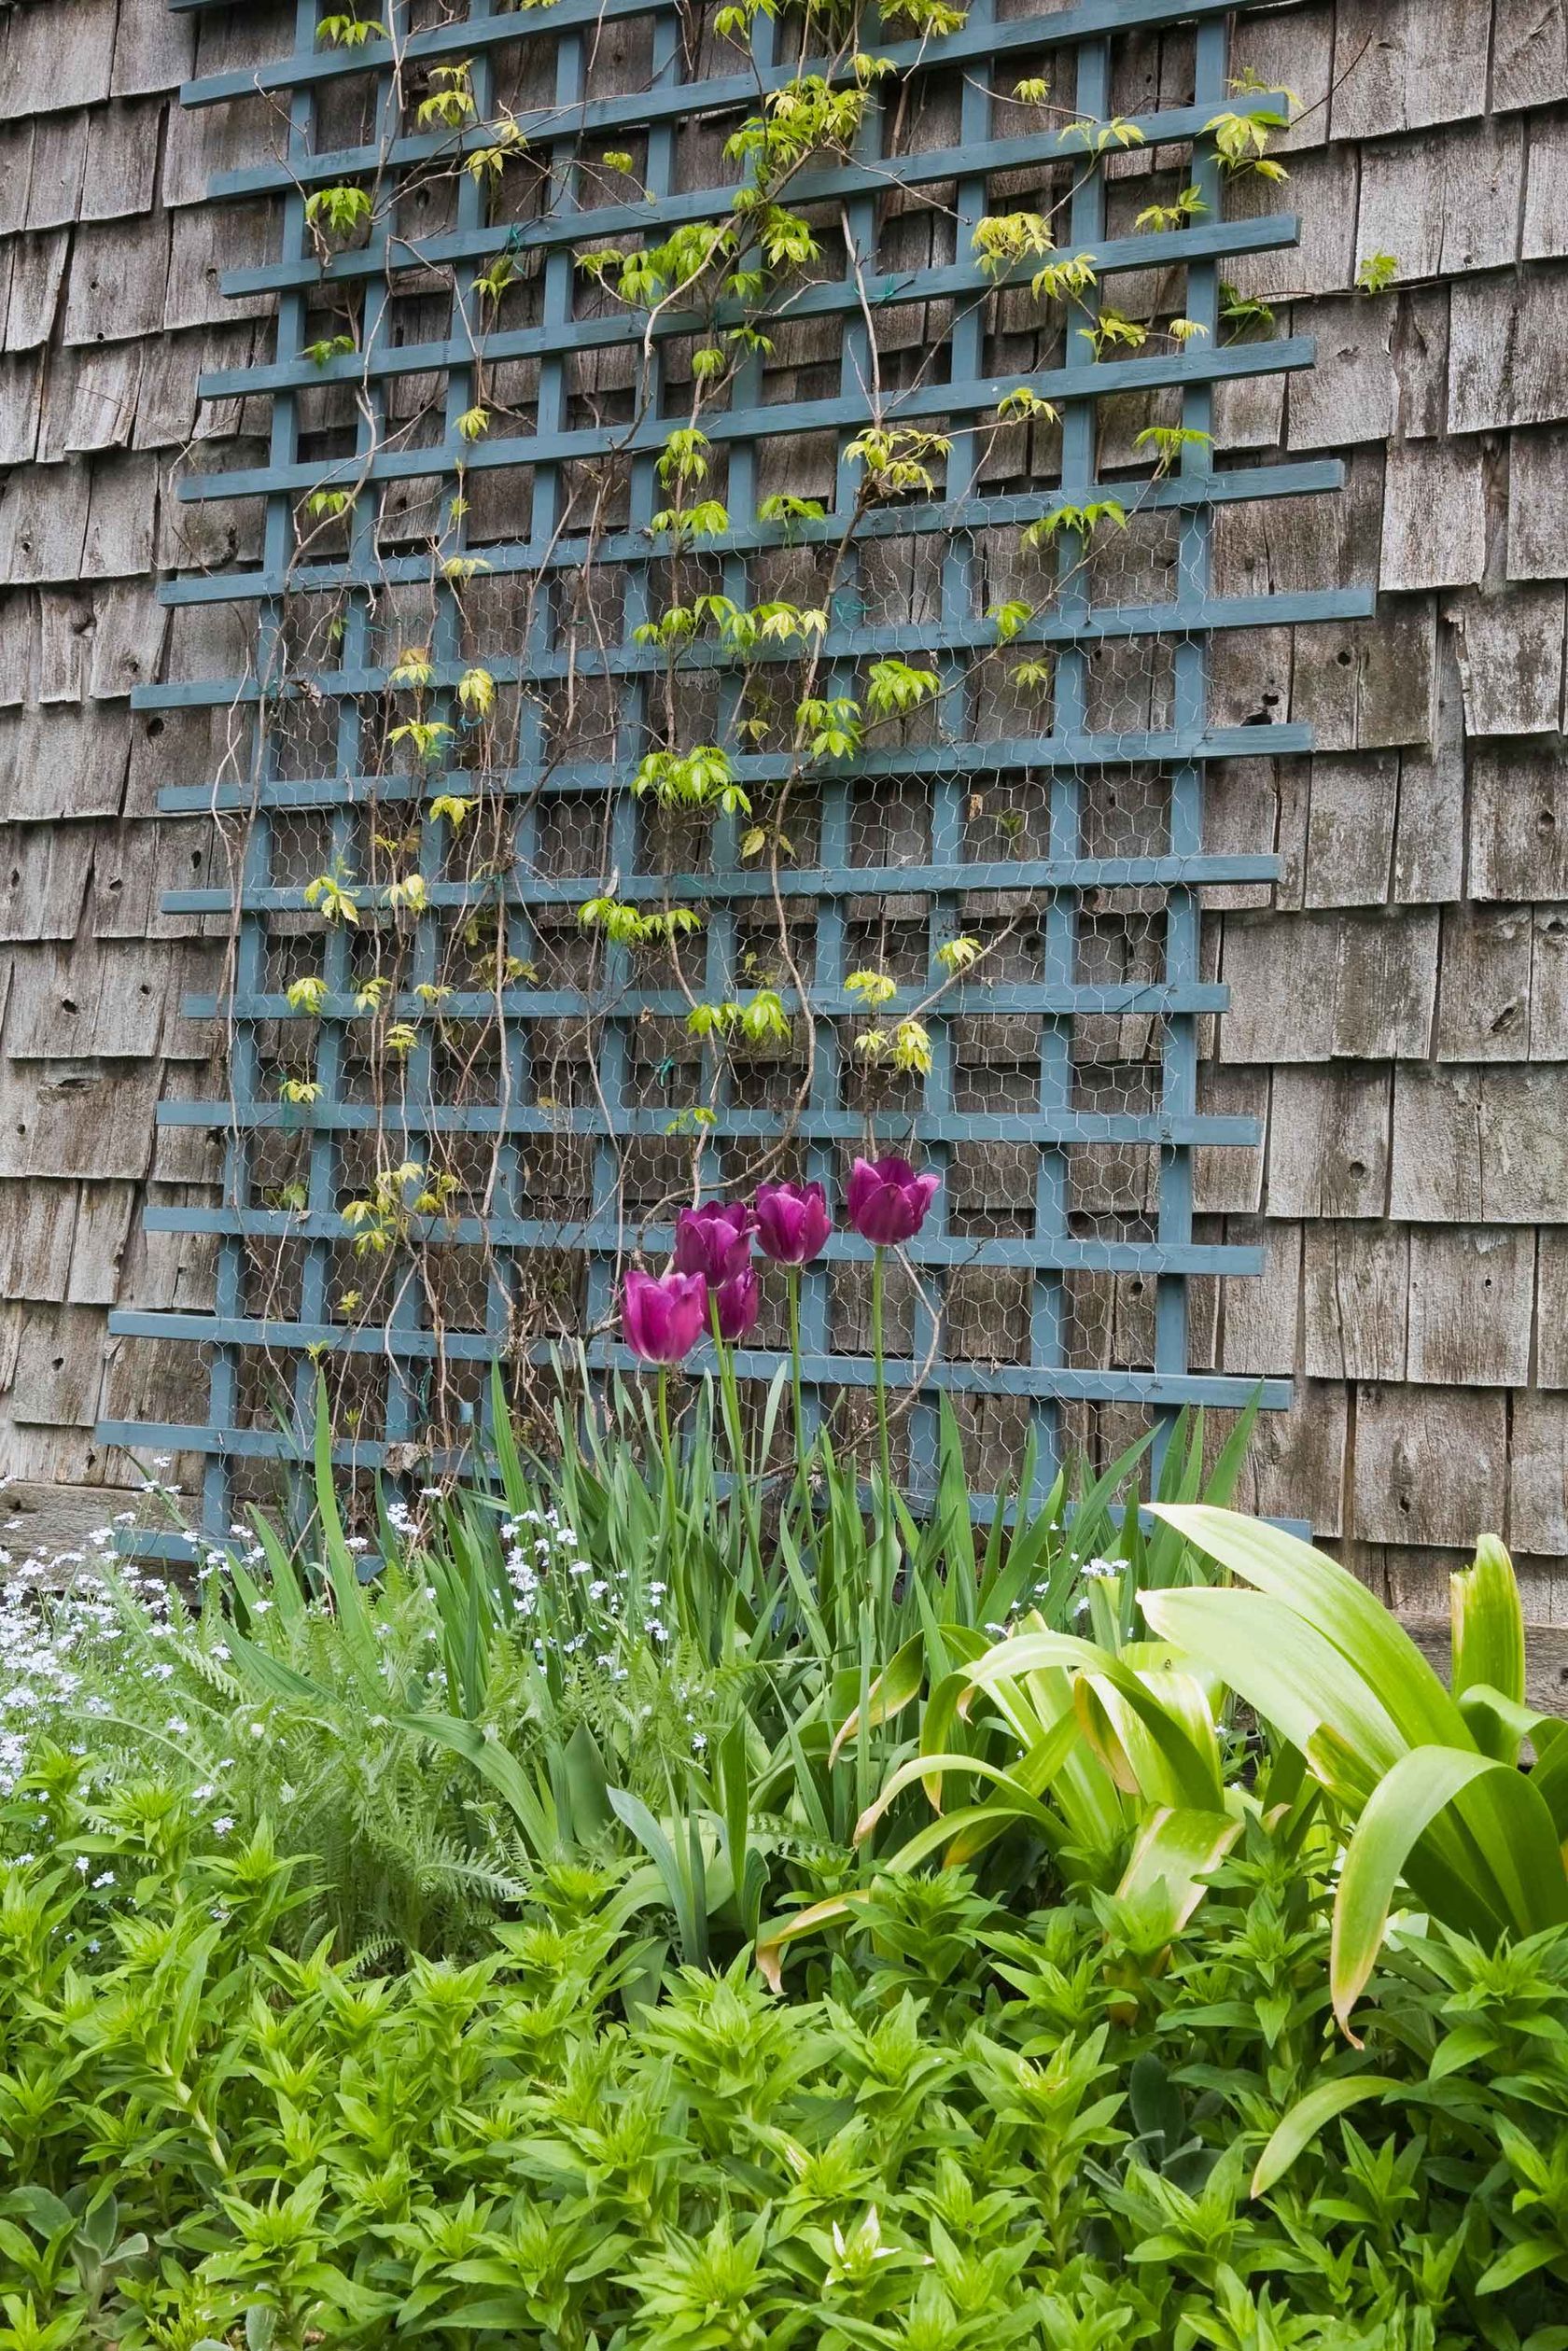 Trellis ideas for gardens: 15 chic screens to add plants, privacy and